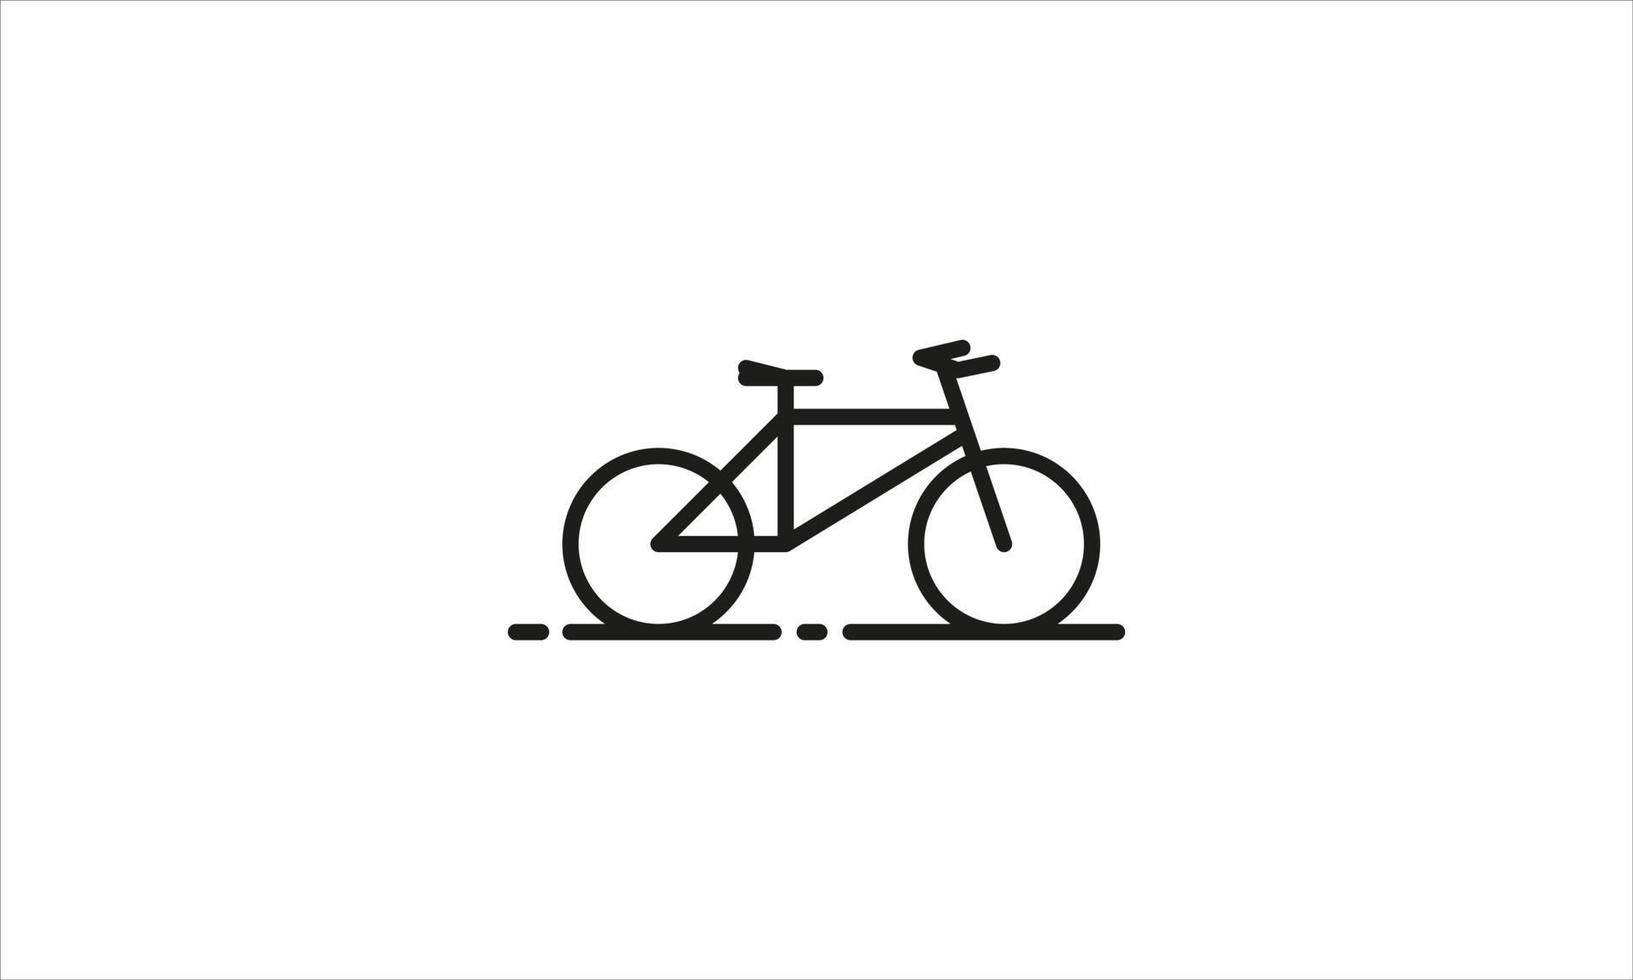 bicycle icon or bike icon isolated on white background. vector ...